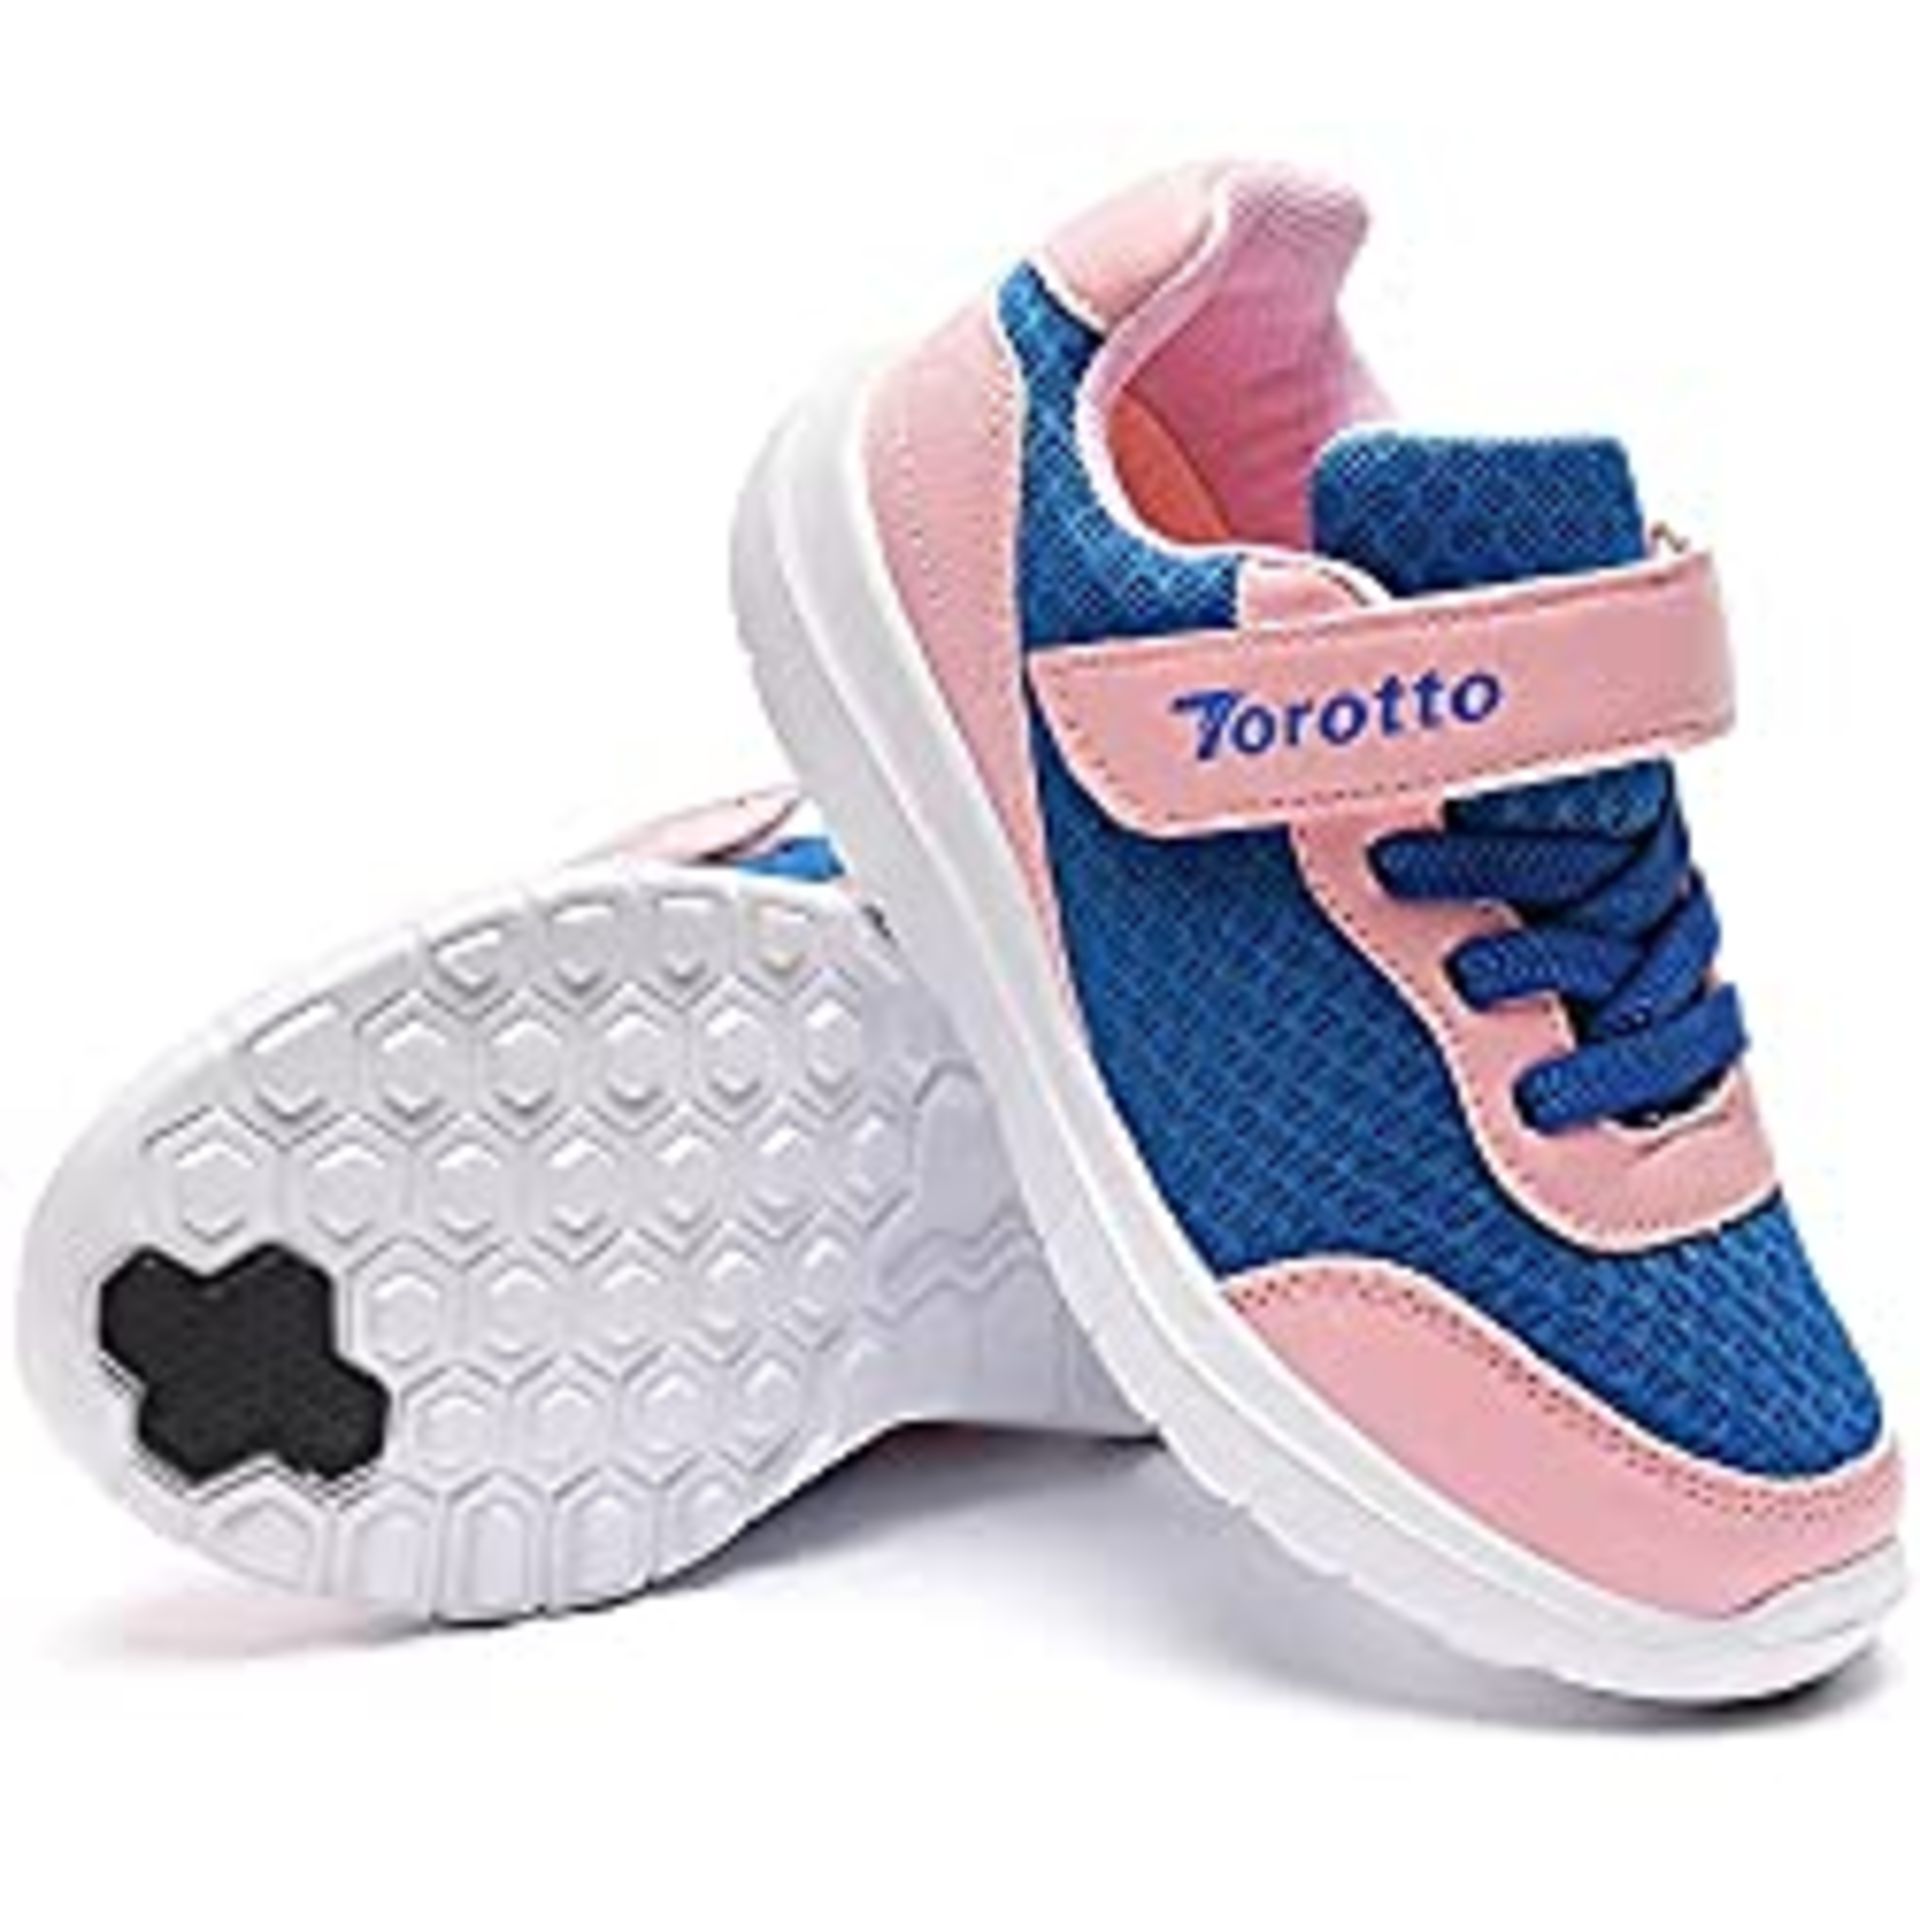 RRP £11.15 BRAND NEW STOCK Torotto Girls Trainers Kids Sneakers Athletic Casual